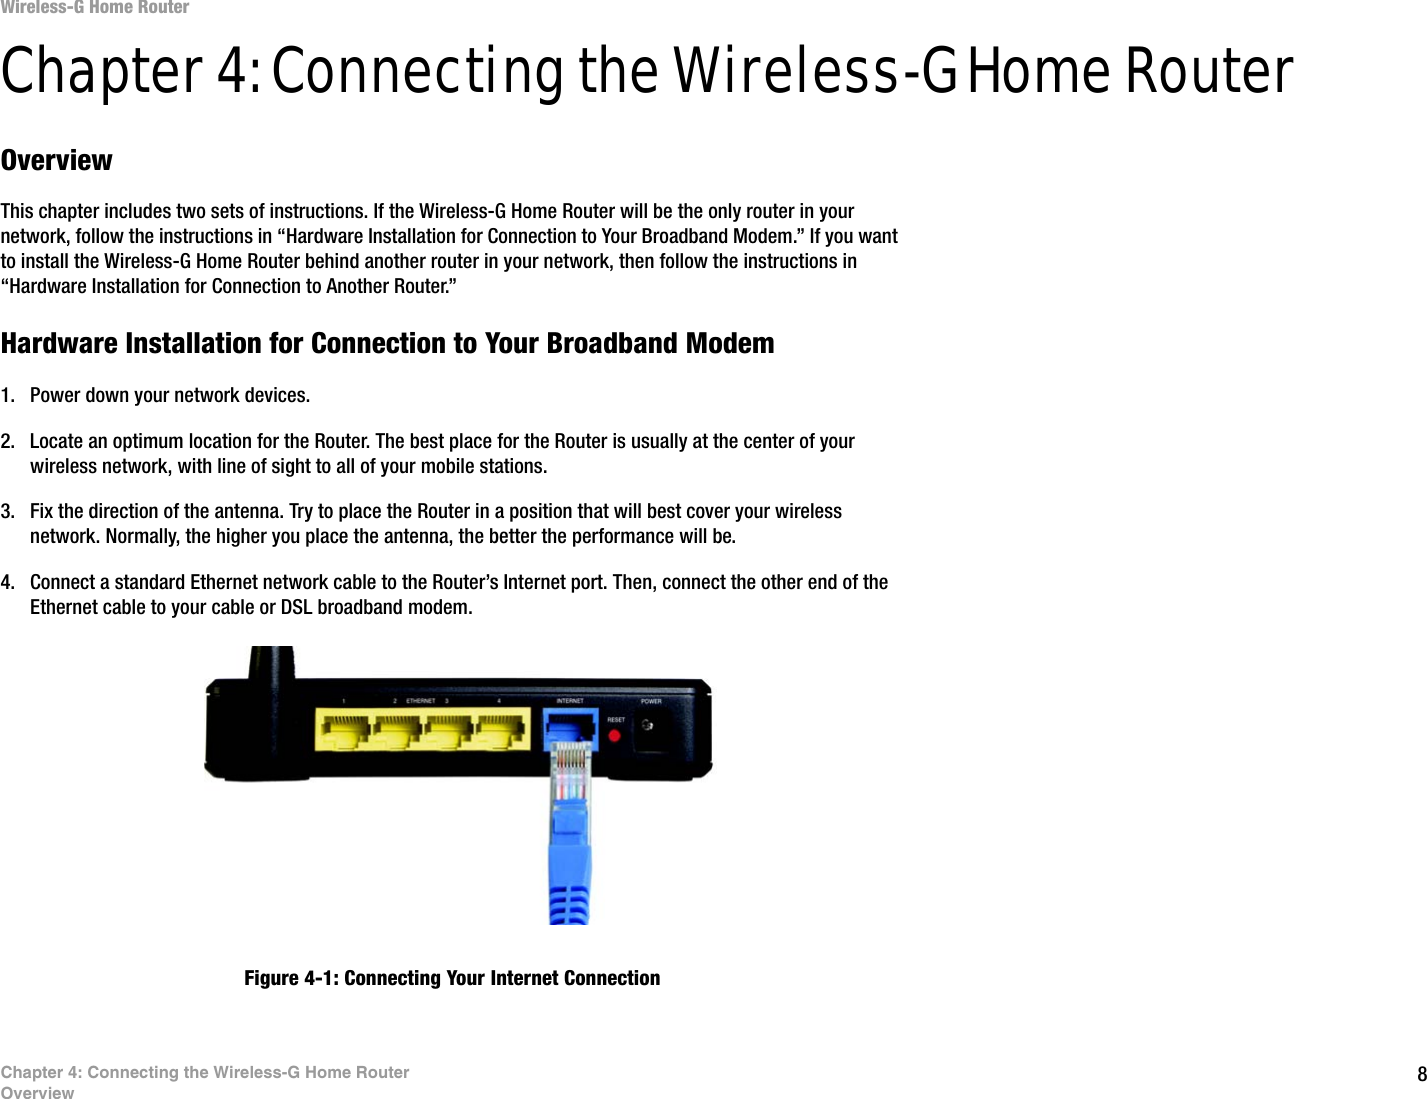 8Chapter 4: Connecting the Wireless-G Home RouterOverviewWireless-G Home RouterChapter 4: Connecting the Wireless-G Home RouterOverviewThis chapter includes two sets of instructions. If the Wireless-G Home Router will be the only router in your network, follow the instructions in “Hardware Installation for Connection to Your Broadband Modem.” If you want to install the Wireless-G Home Router behind another router in your network, then follow the instructions in “Hardware Installation for Connection to Another Router.”Hardware Installation for Connection to Your Broadband Modem1. Power down your network devices.2. Locate an optimum location for the Router. The best place for the Router is usually at the center of your wireless network, with line of sight to all of your mobile stations.3. Fix the direction of the antenna. Try to place the Router in a position that will best cover your wireless network. Normally, the higher you place the antenna, the better the performance will be.4. Connect a standard Ethernet network cable to the Router’s Internet port. Then, connect the other end of the Ethernet cable to your cable or DSL broadband modem.Figure 4-1: Connecting Your Internet Connection